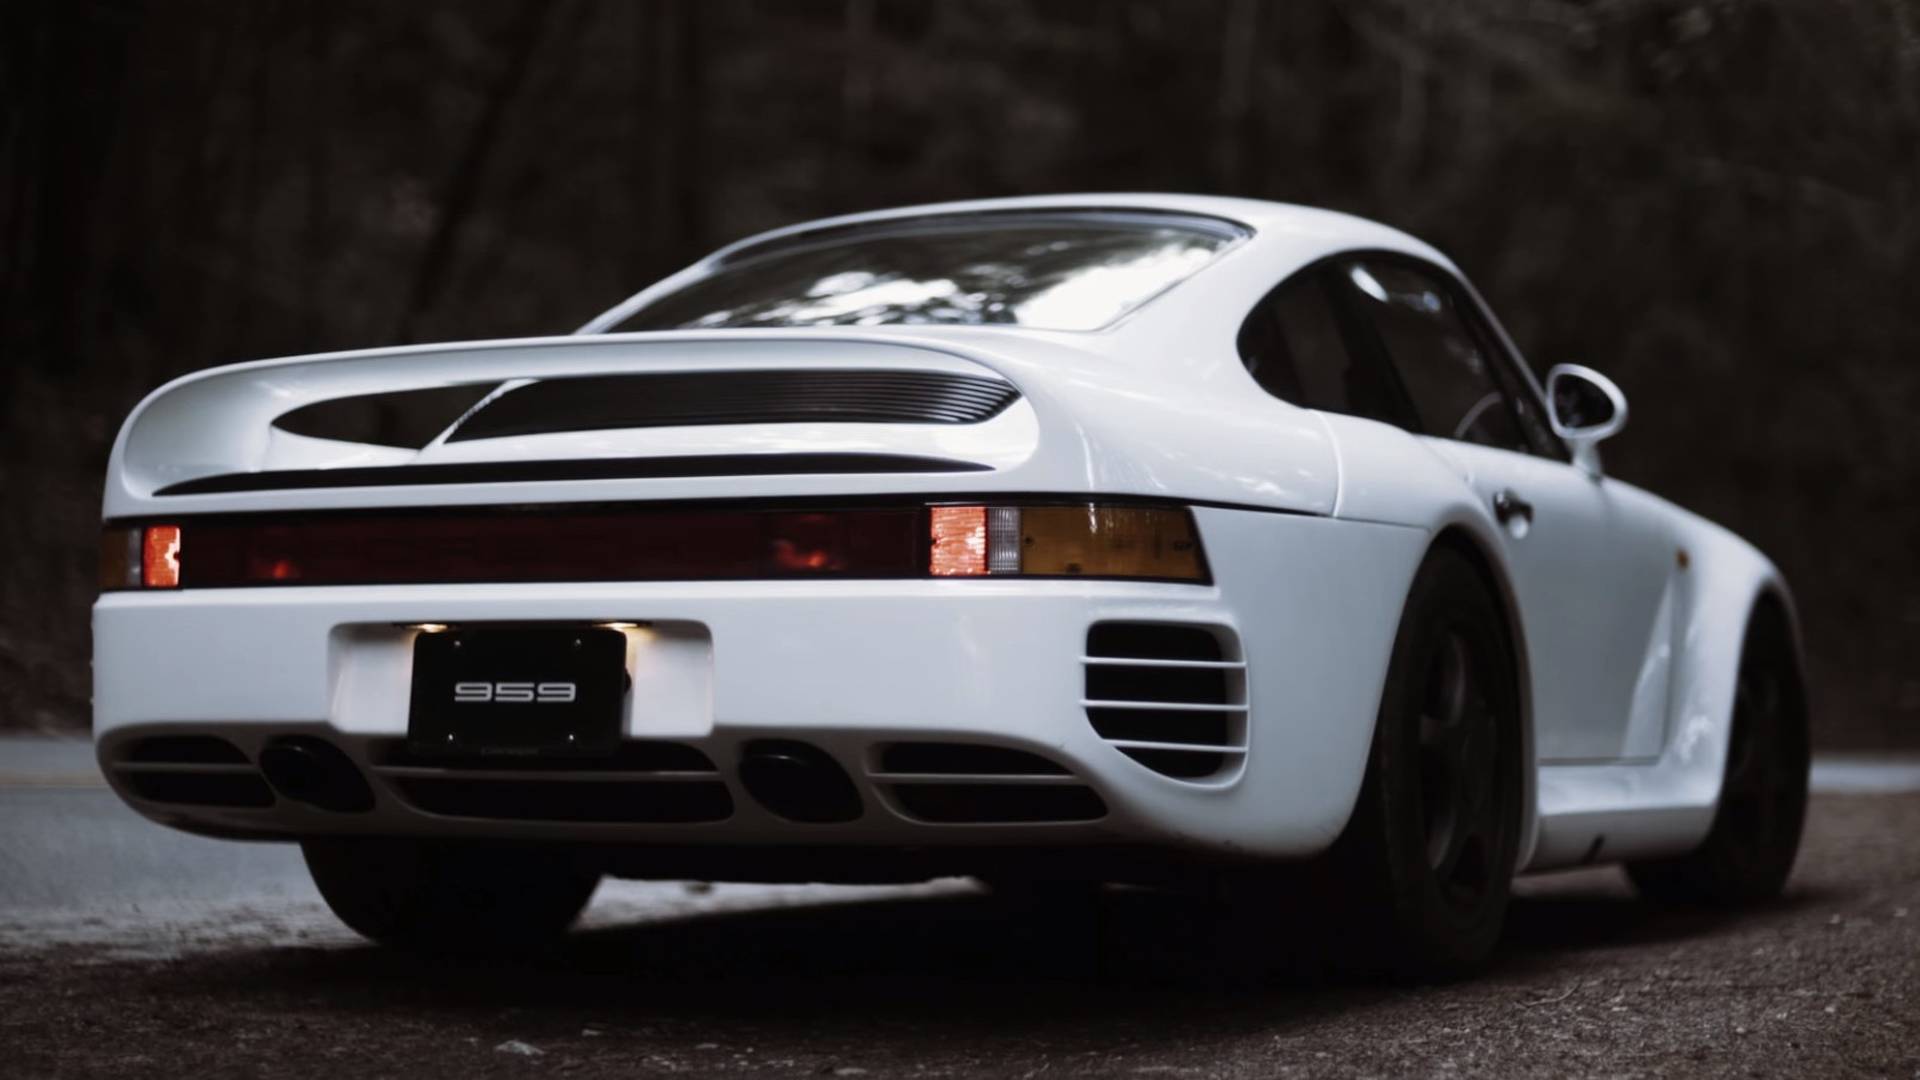 Discover Why The Porsche 959 Was The Forward Thinking Supercar